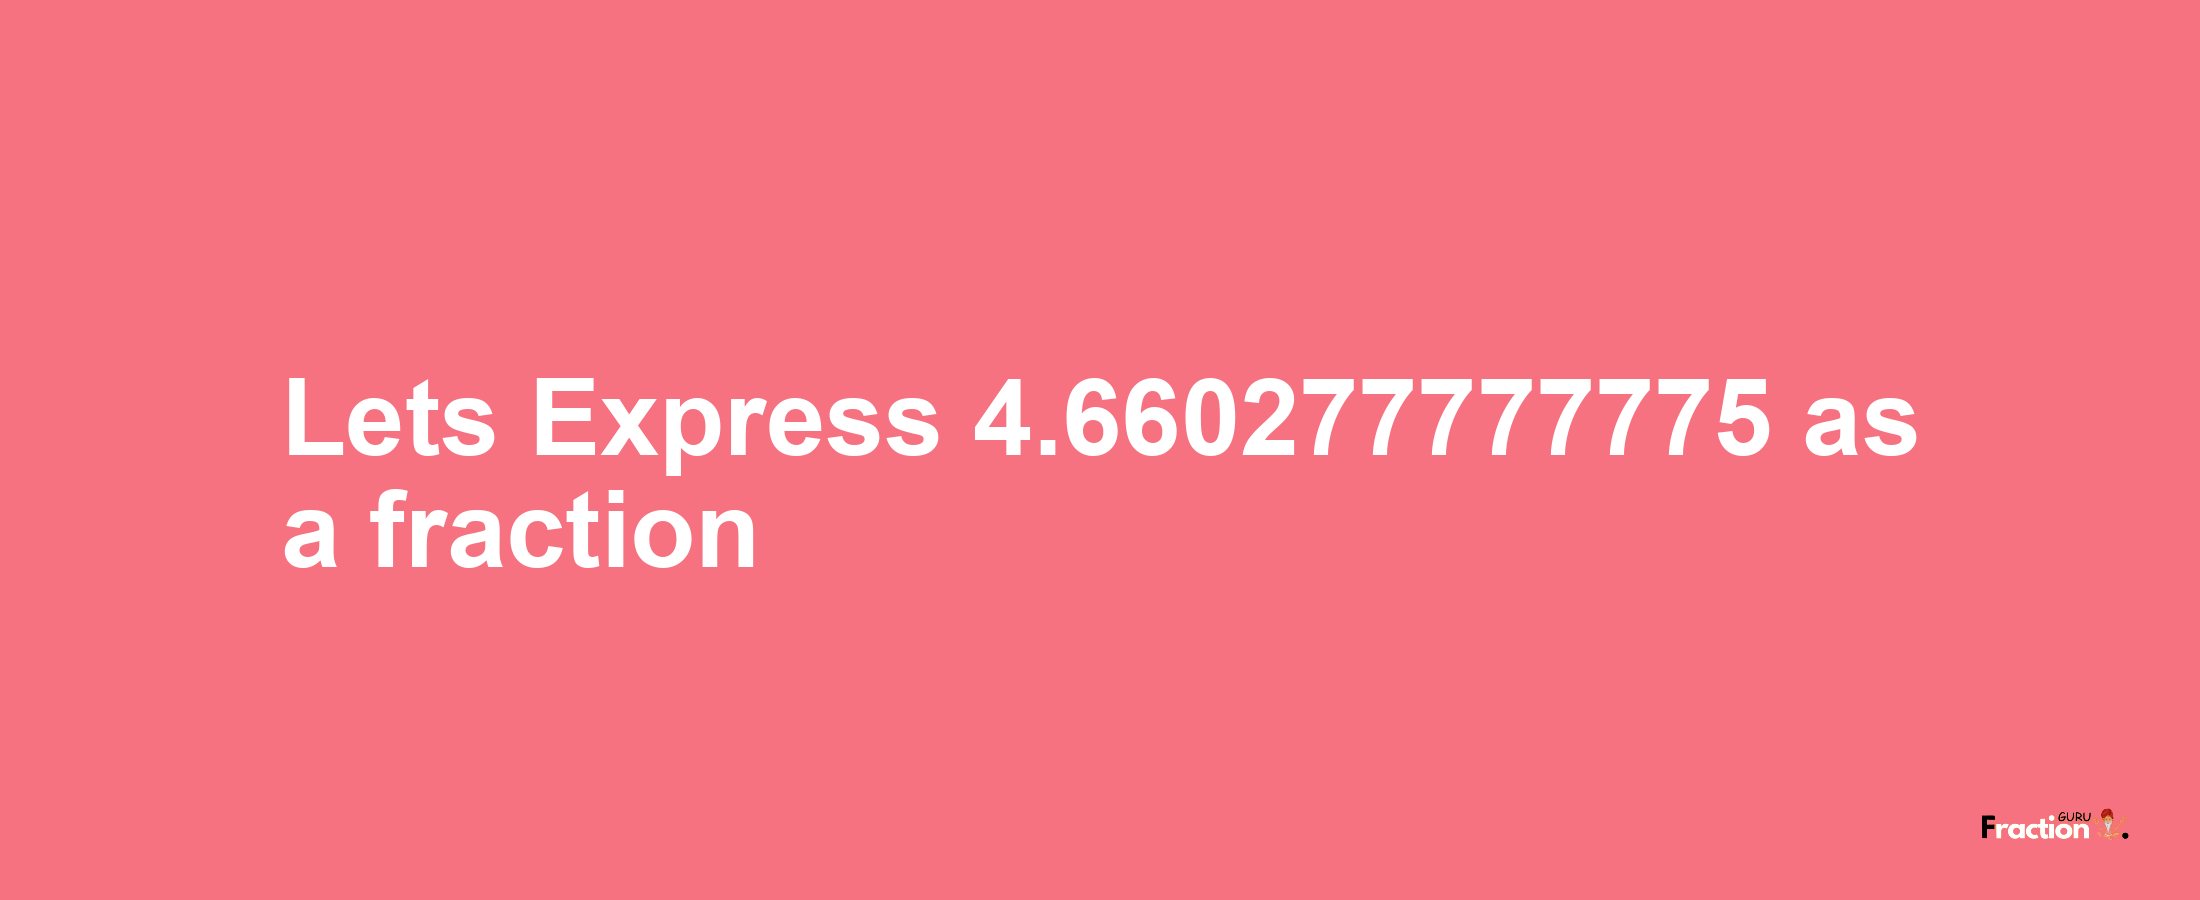 Lets Express 4.660277777775 as afraction